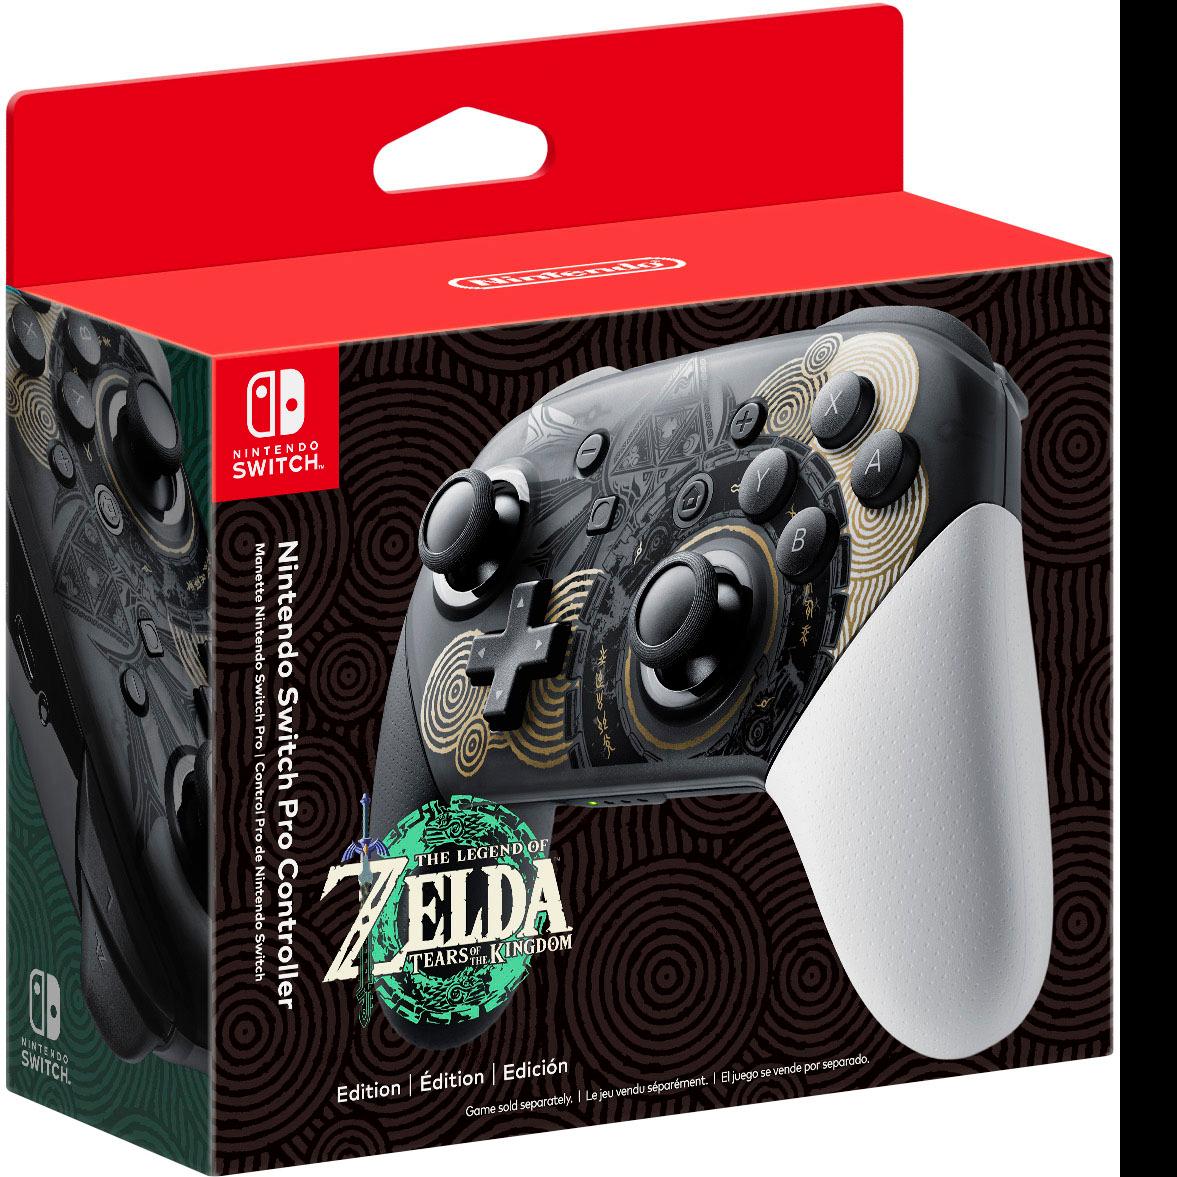 Nintendo Switch Pro Controller Legend of Zelda Edition for $74.99 Shipped